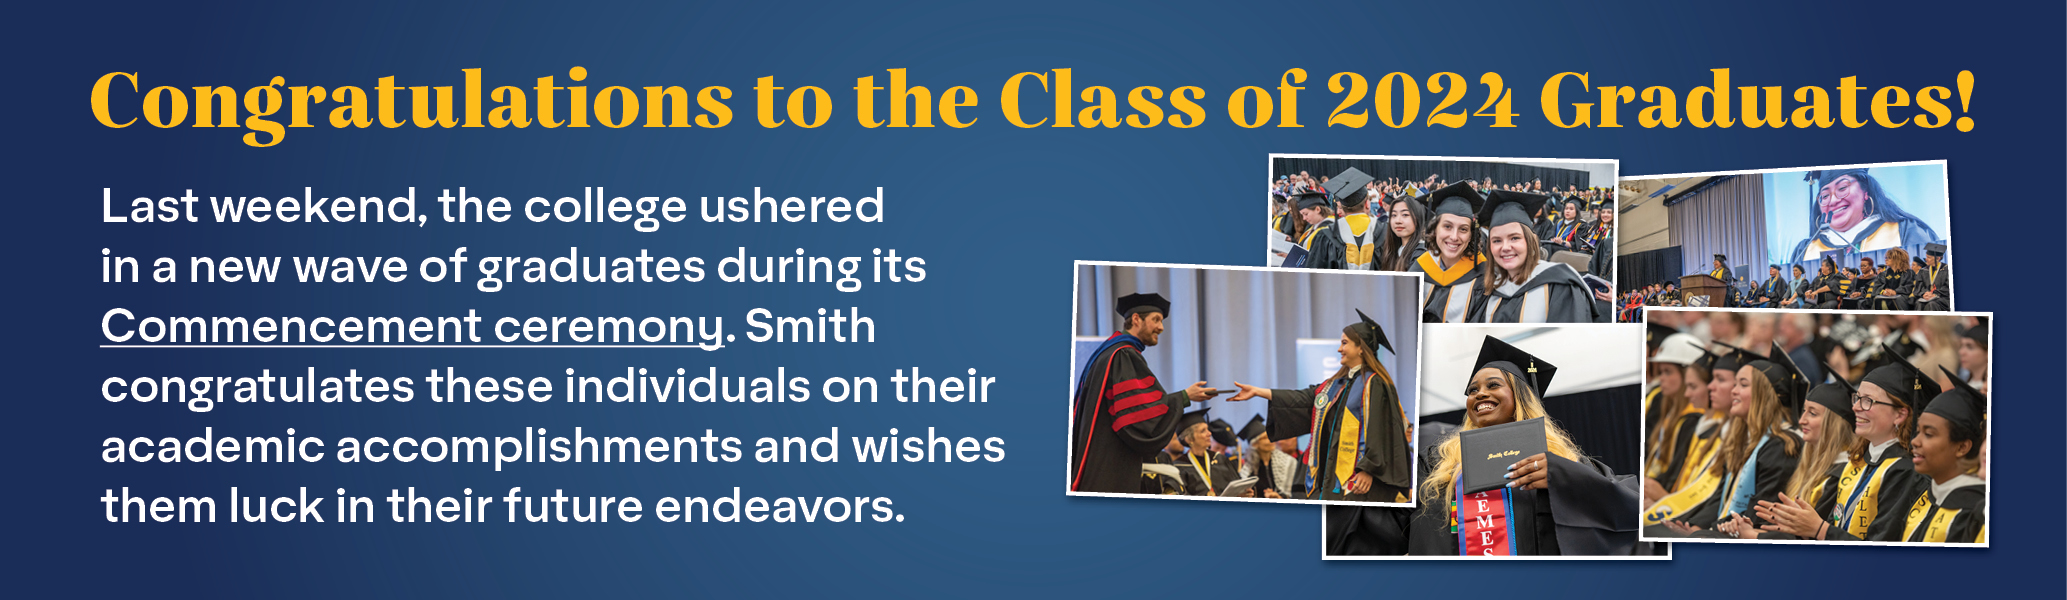 A promotional banner for Smith College showing class of 2024 graduates in commemoration of the school's recent Commencement.